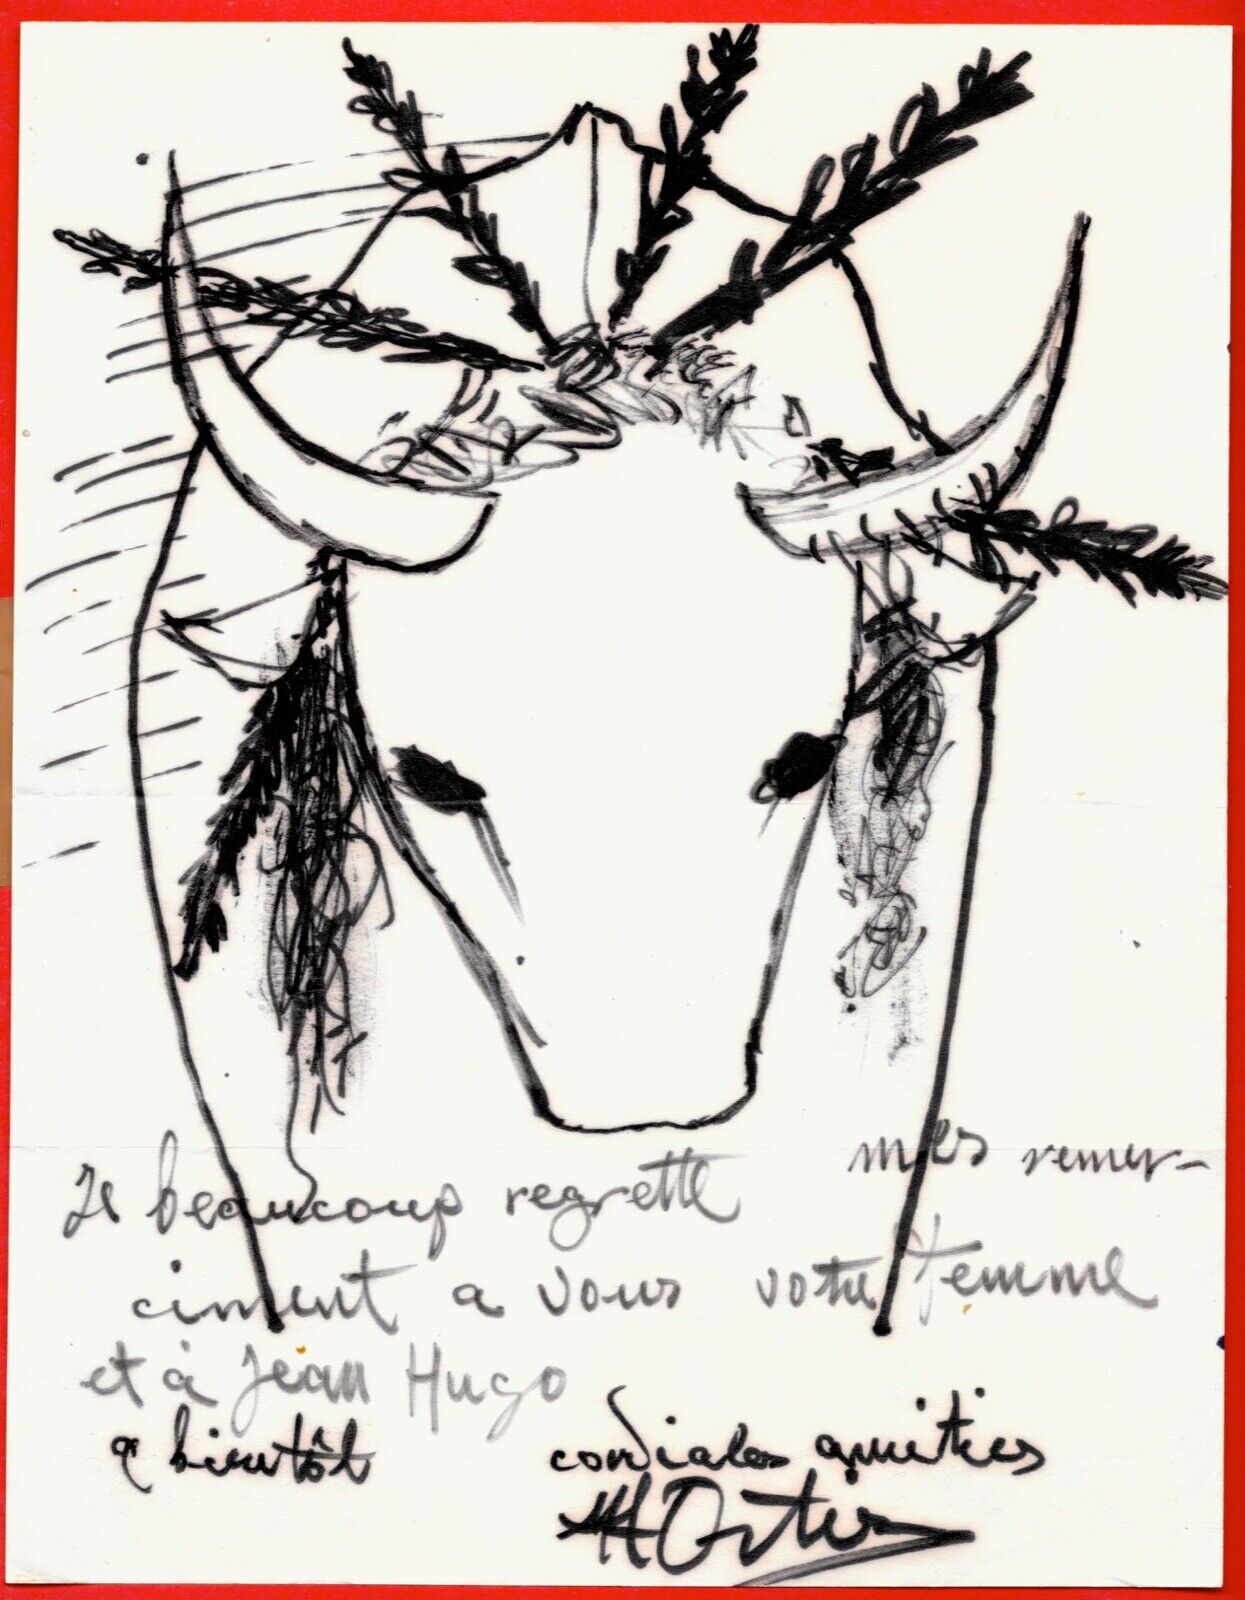 DM6-DRAWING-L.A.S-MANUEL ANGELES ORTHIZ-SPANISH PAINTER-[JEAN HUGO-PICASSO]-1953